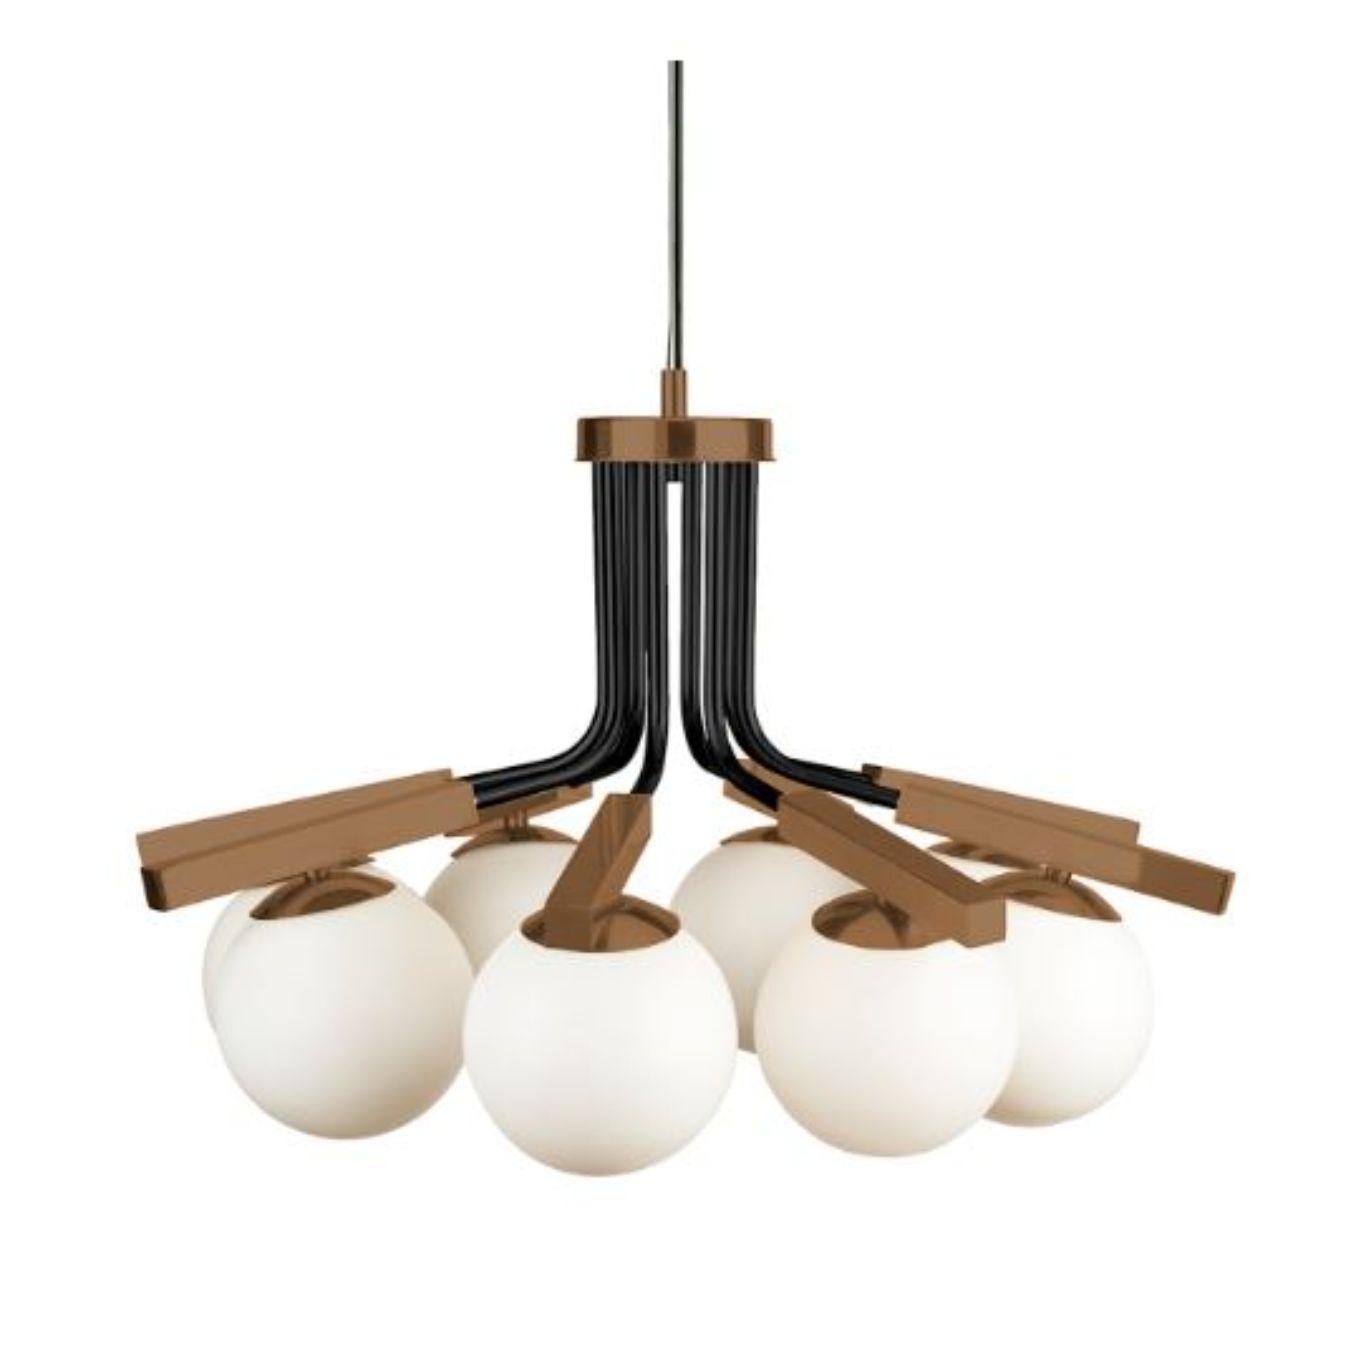 Globe I Suspension lamp by Dooq
Dimensions: W 80 x D 80 x H 45 cm
Materials: lacquered metal, polished or brushed metal, bronze.
Also available in different colors and materials. 

Information:
230V/50Hz
8 x max. G9
4W LED

120V/60Hz
8 x